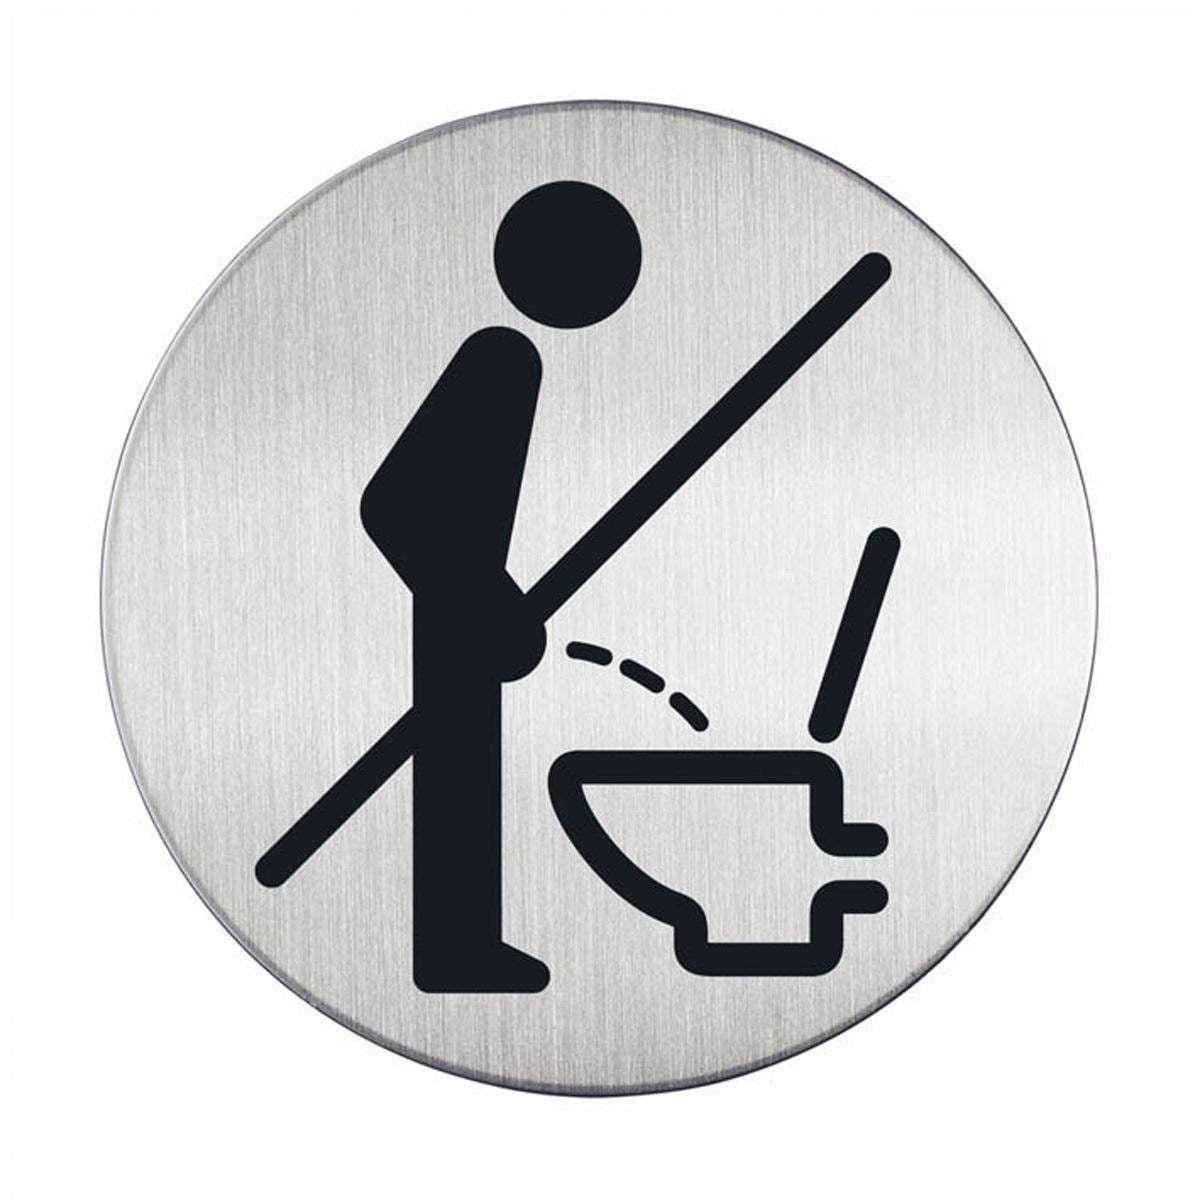 Durable Adhesive Please Sit Down Symbol Bathroom Toilet Sign | Stainless Steel